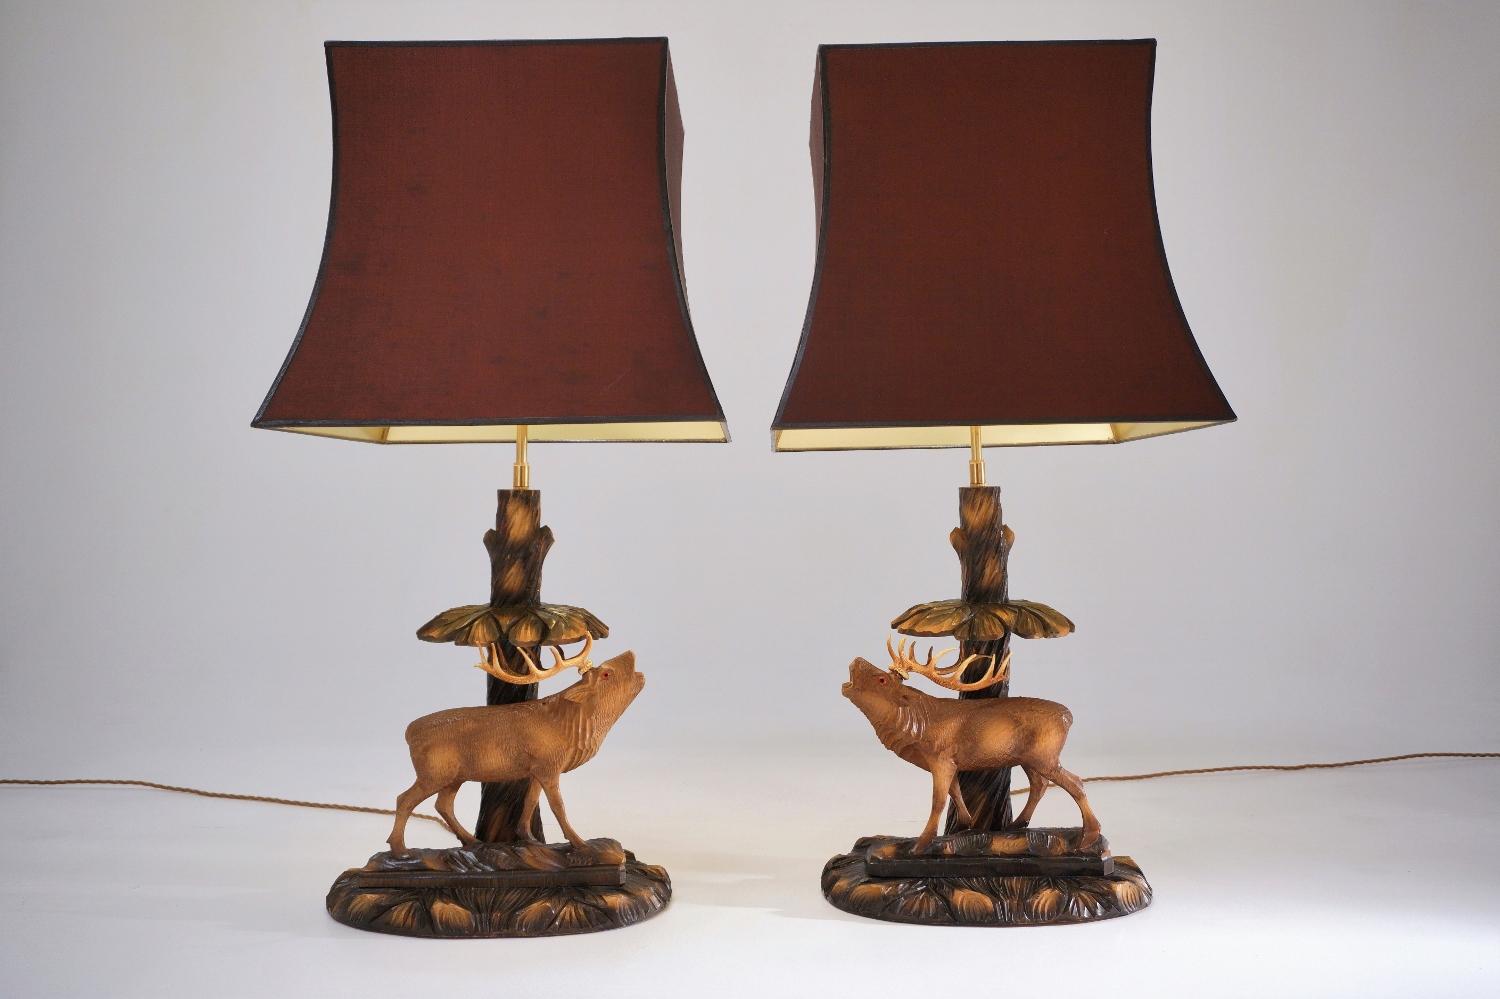 Adirondack Deer Lamp, a Pair Black Forest Carving by Rhön Sepp 1940s, Germany For Sale